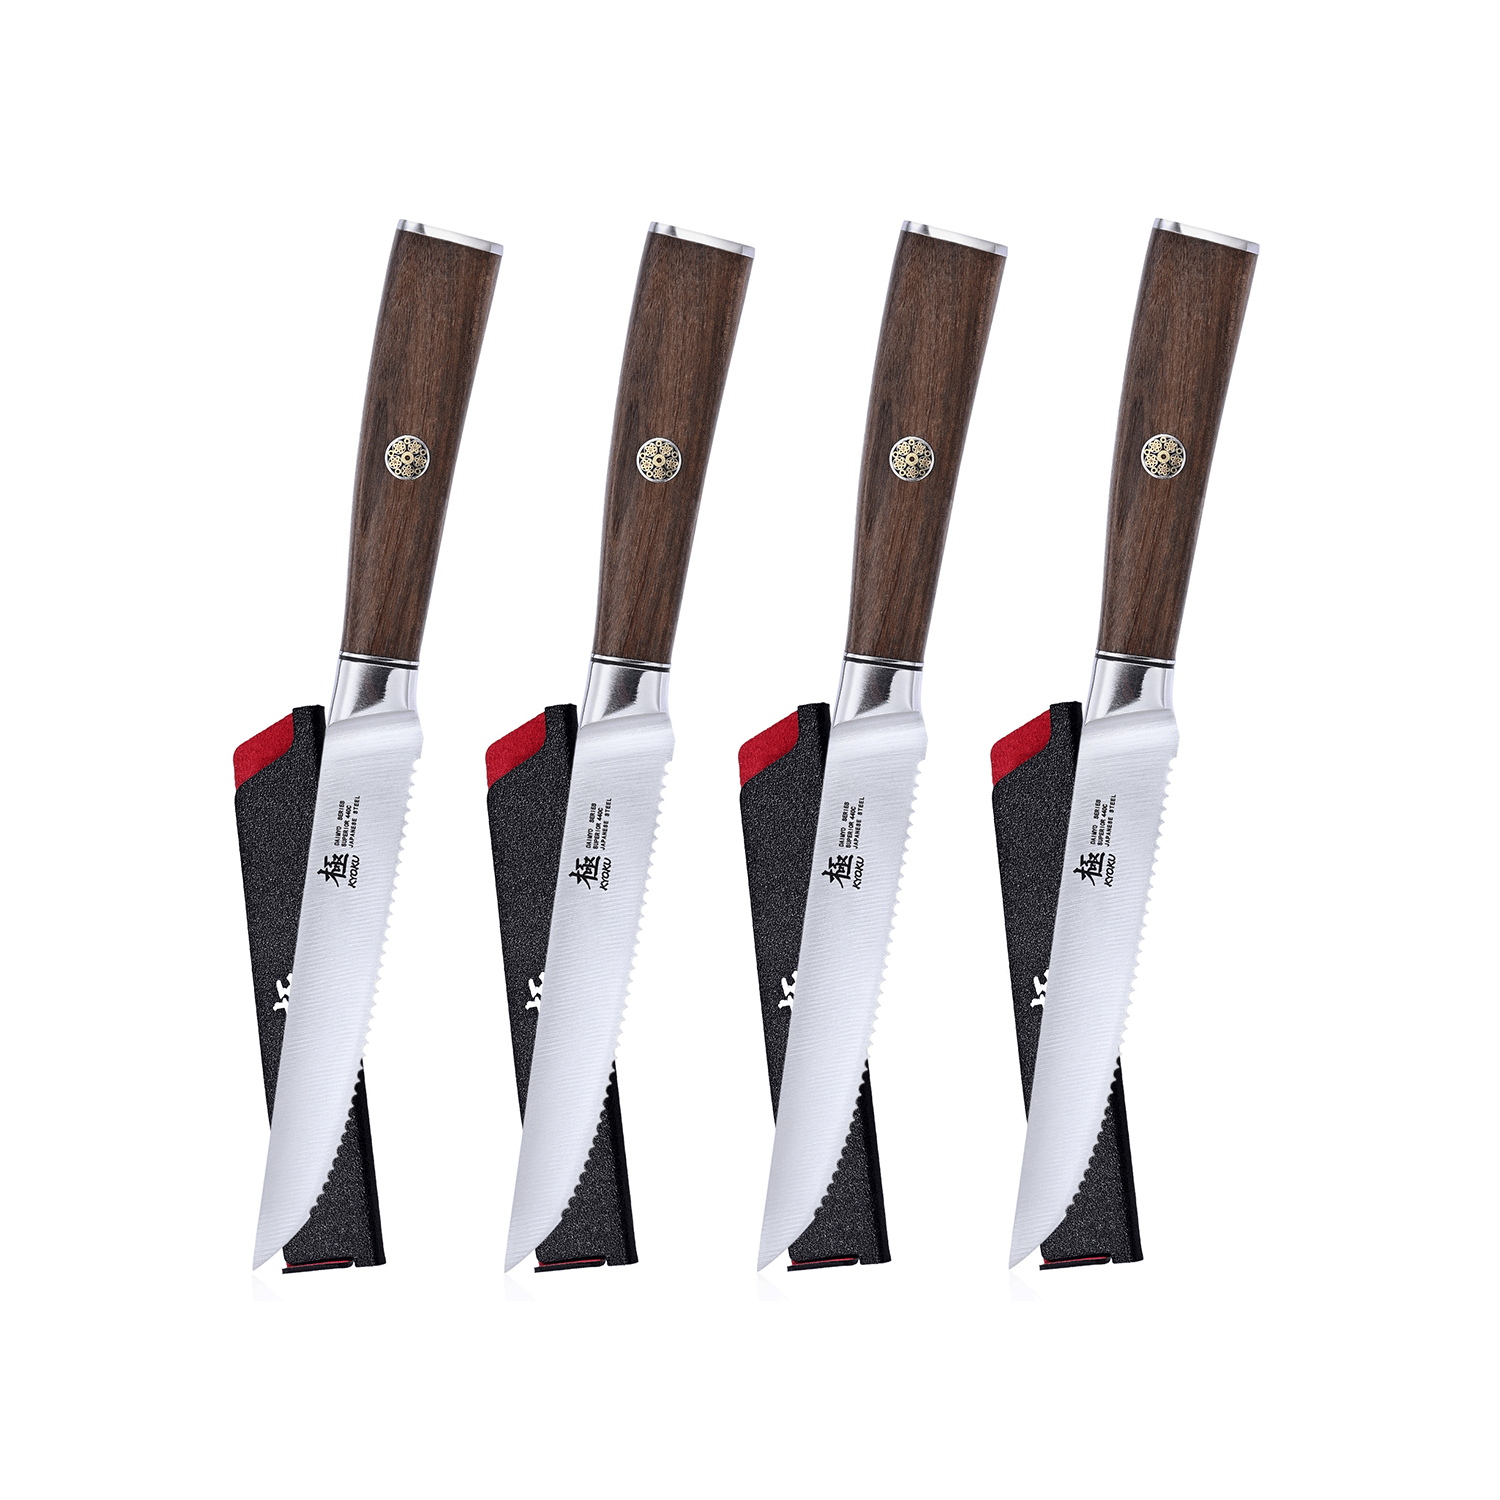 Performance 4 Piece Stainless Steel Steak Knives